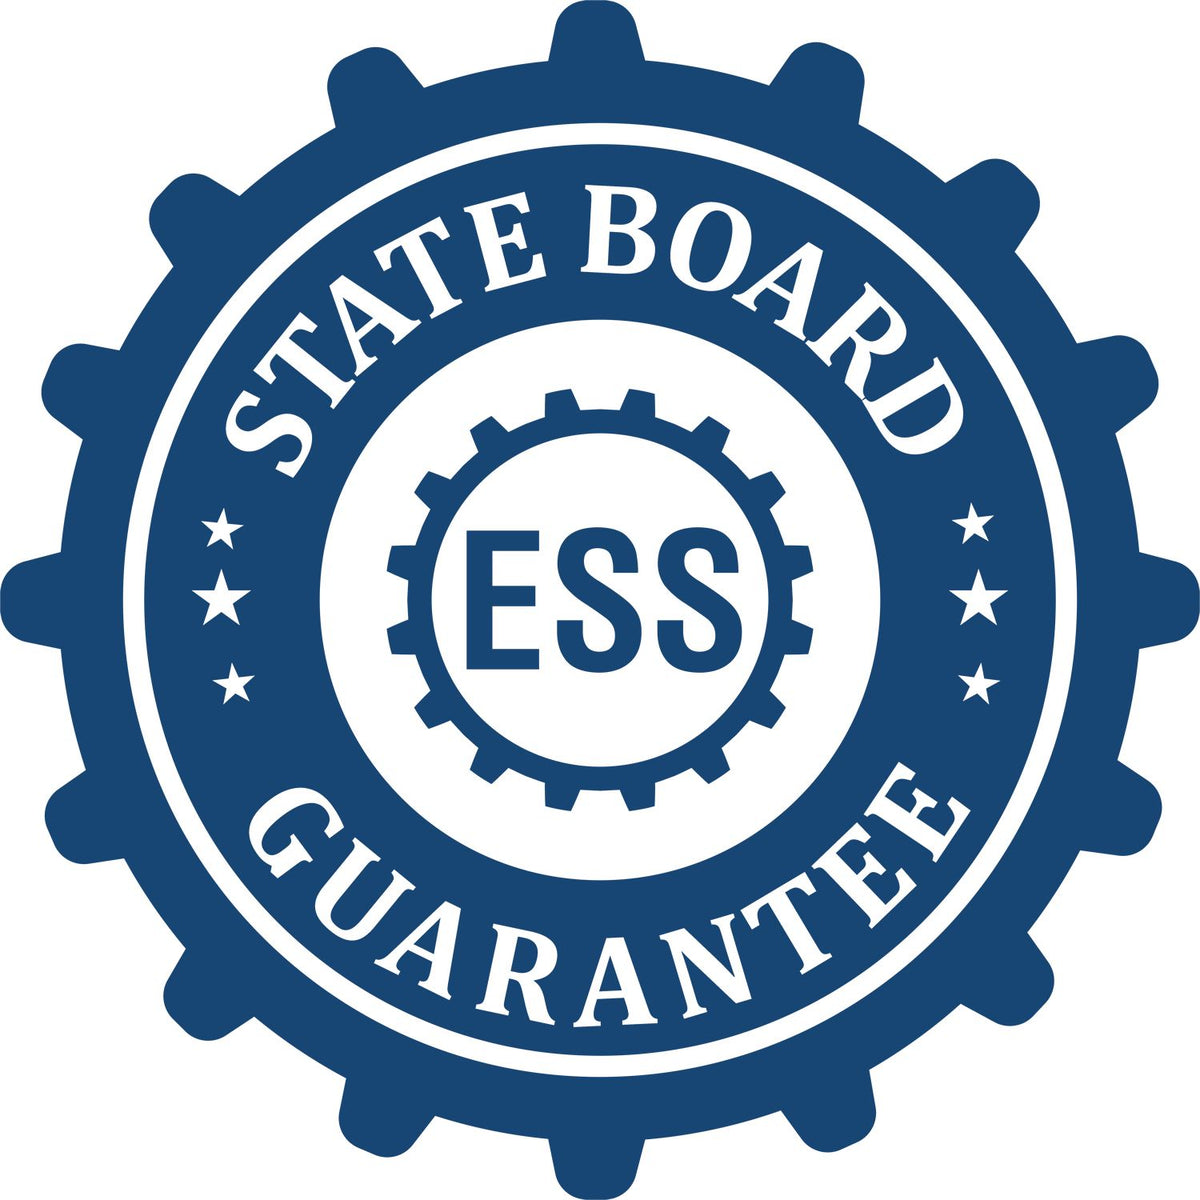 An emblem in a gear shape illustrating a state board guarantee for the Digital Guam PE Stamp and Electronic Seal for Guam Engineer product.